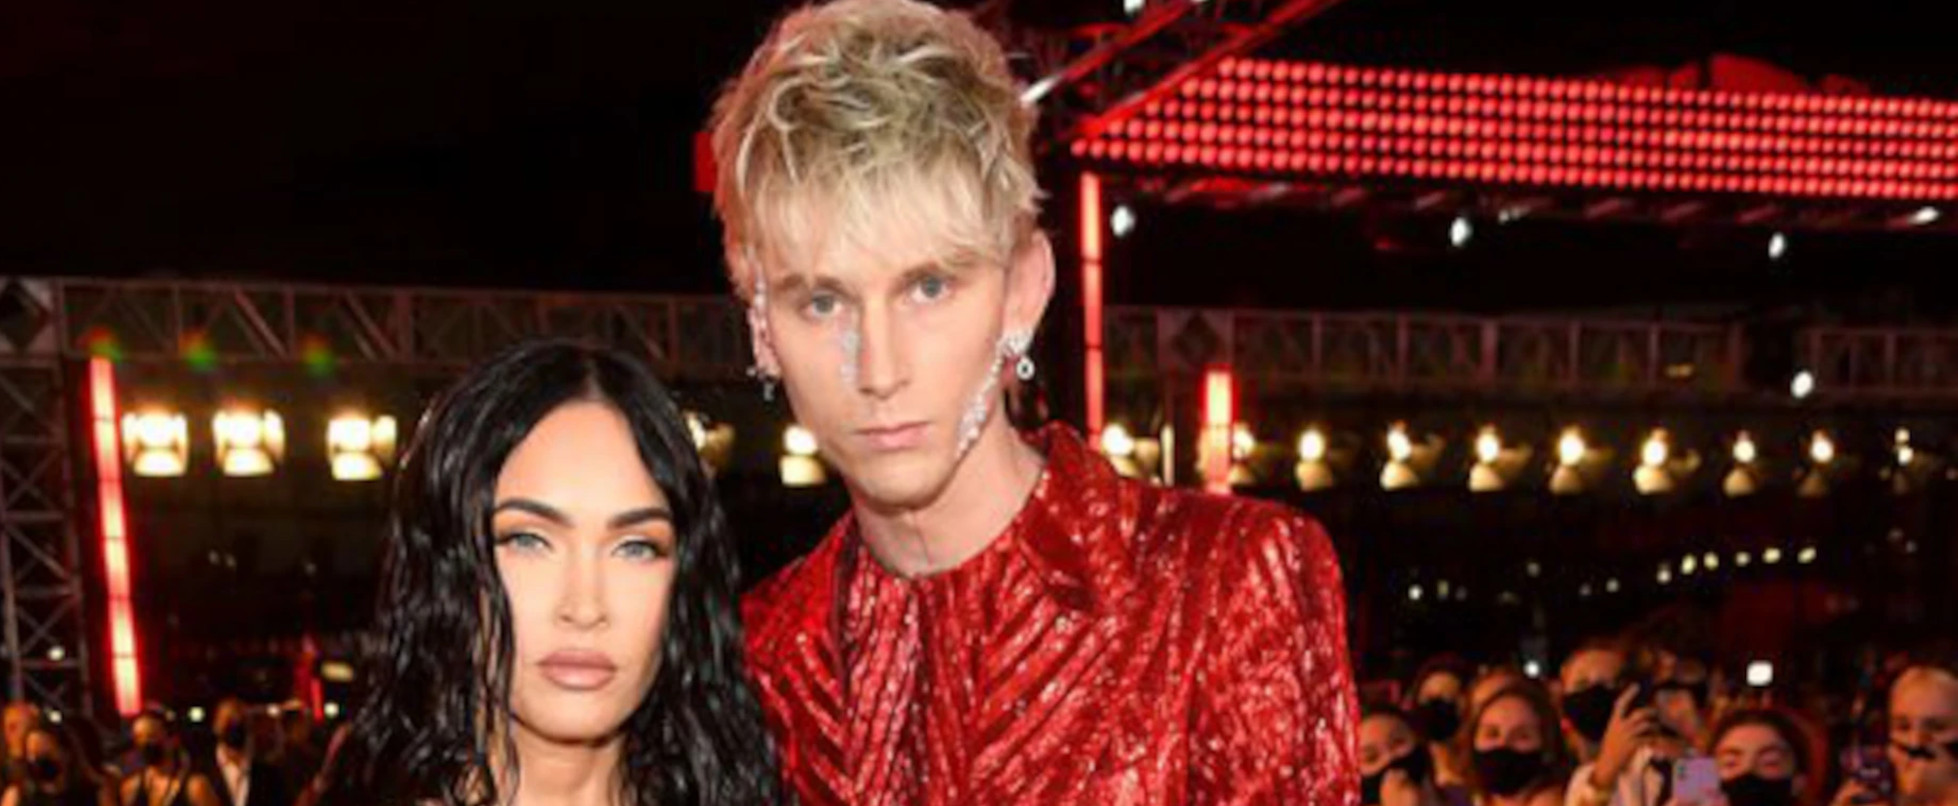 Machine Gun Kelly Fights With Fans, Gets Booed at Louder Than Life Festival